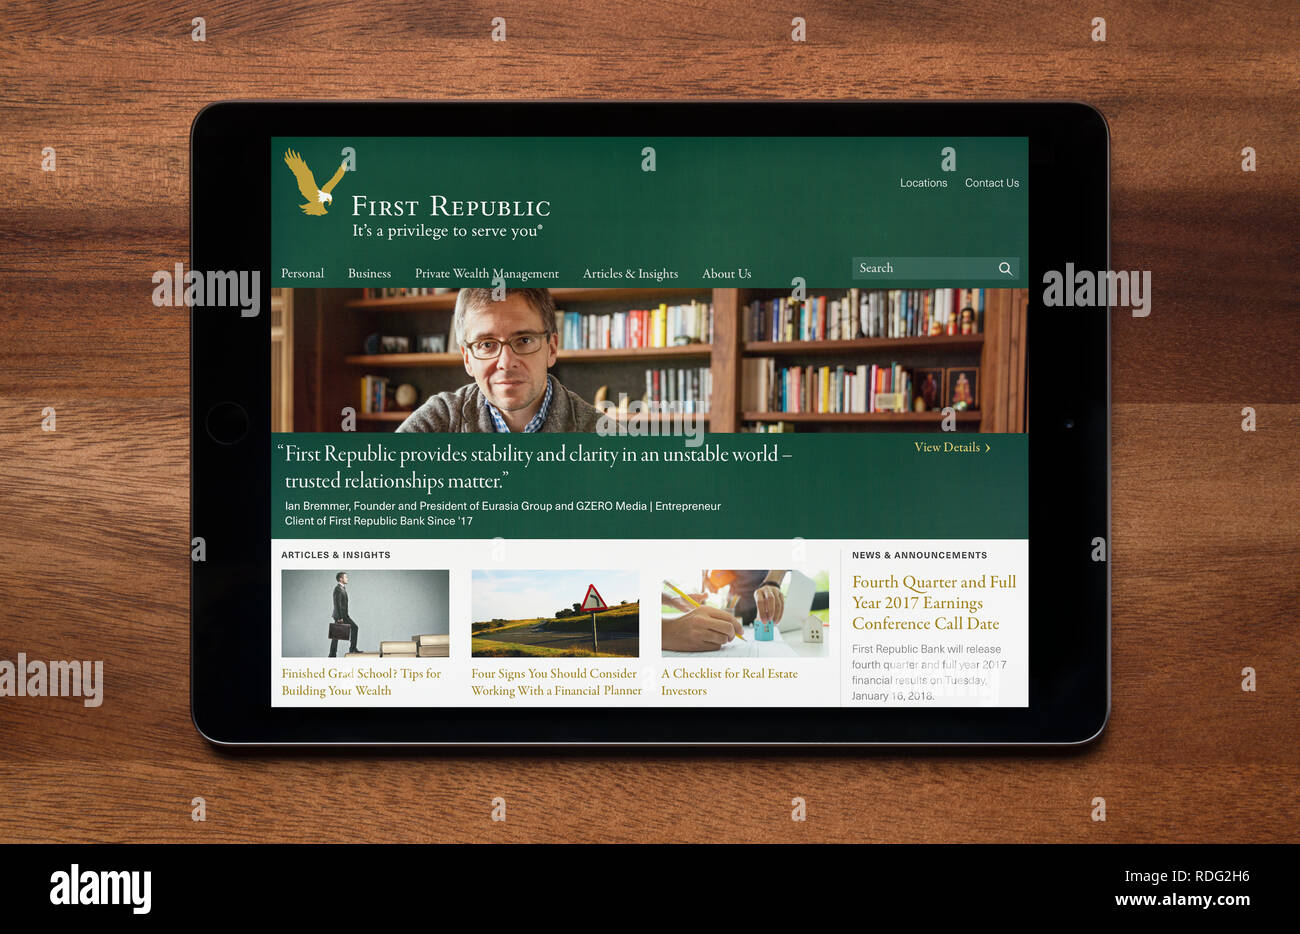 The website of First Republic bank is seen on an iPad tablet, which is resting on a wooden table (Editorial use only). Stock Photo